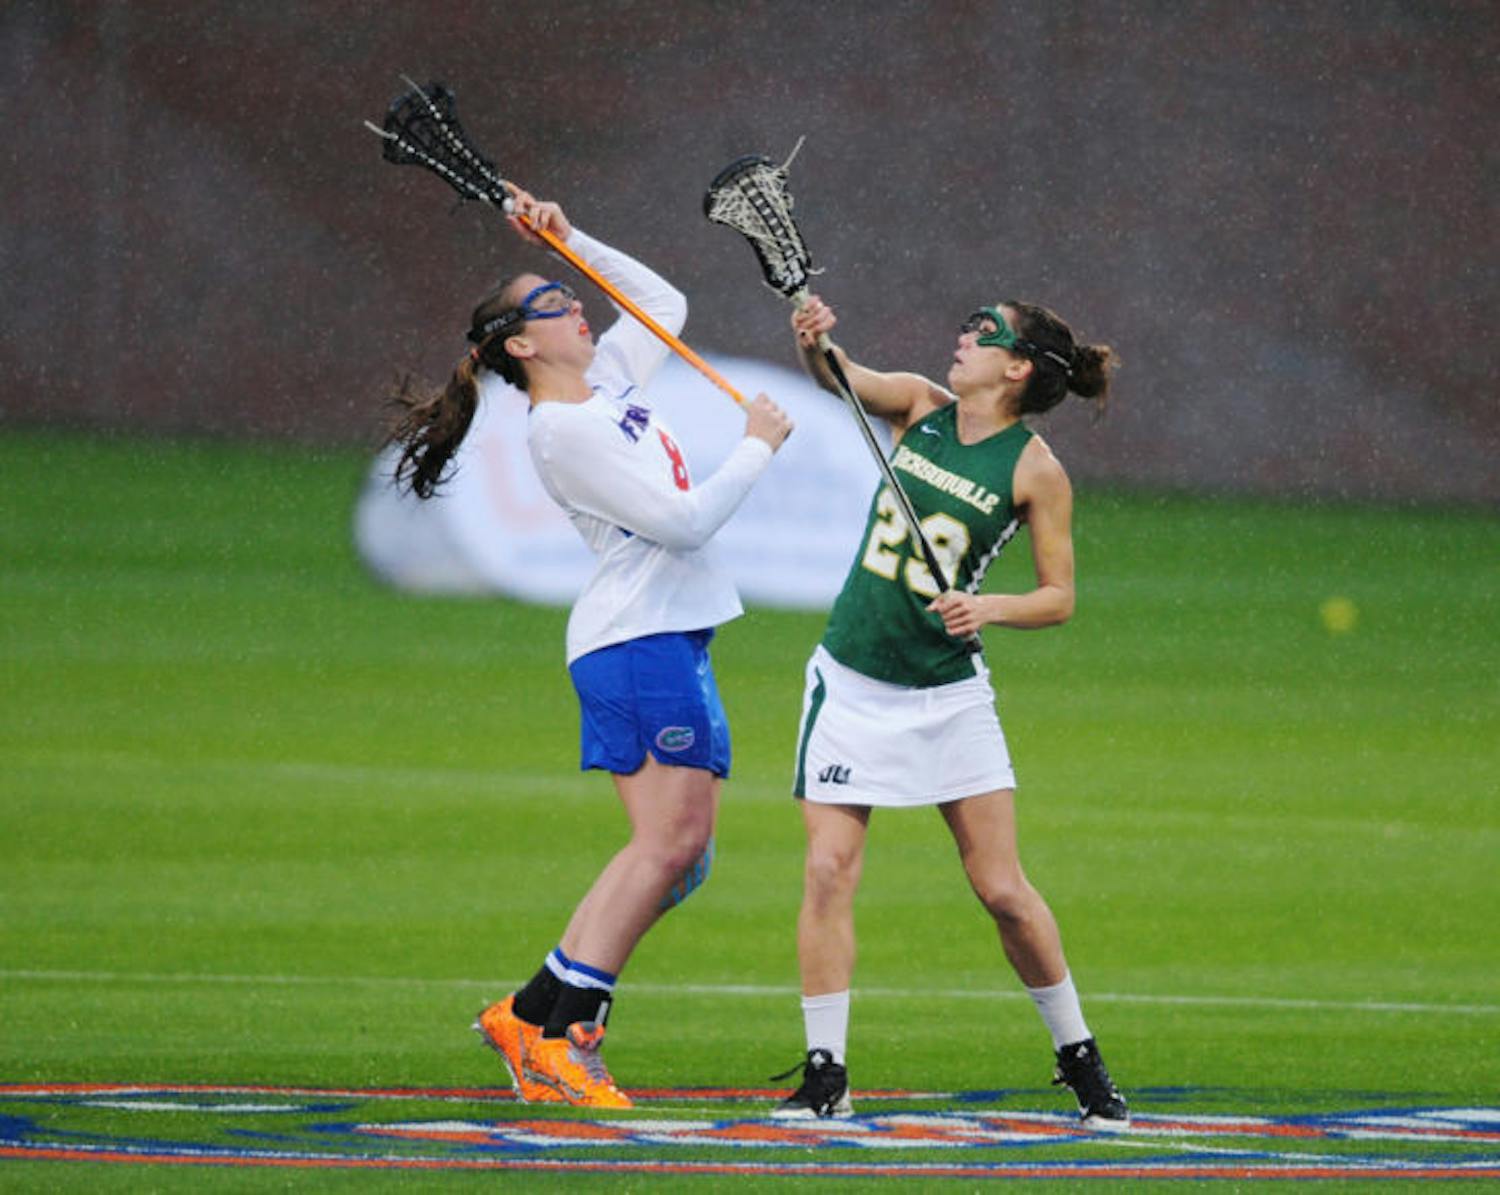 Shannon Gilroy fights for the ball during Florida’s 21-5 win against Jacksonville on Feb. 12 at Donald R. Dizney Stadium. Gilroy leads the Gators with 35 goals this season.